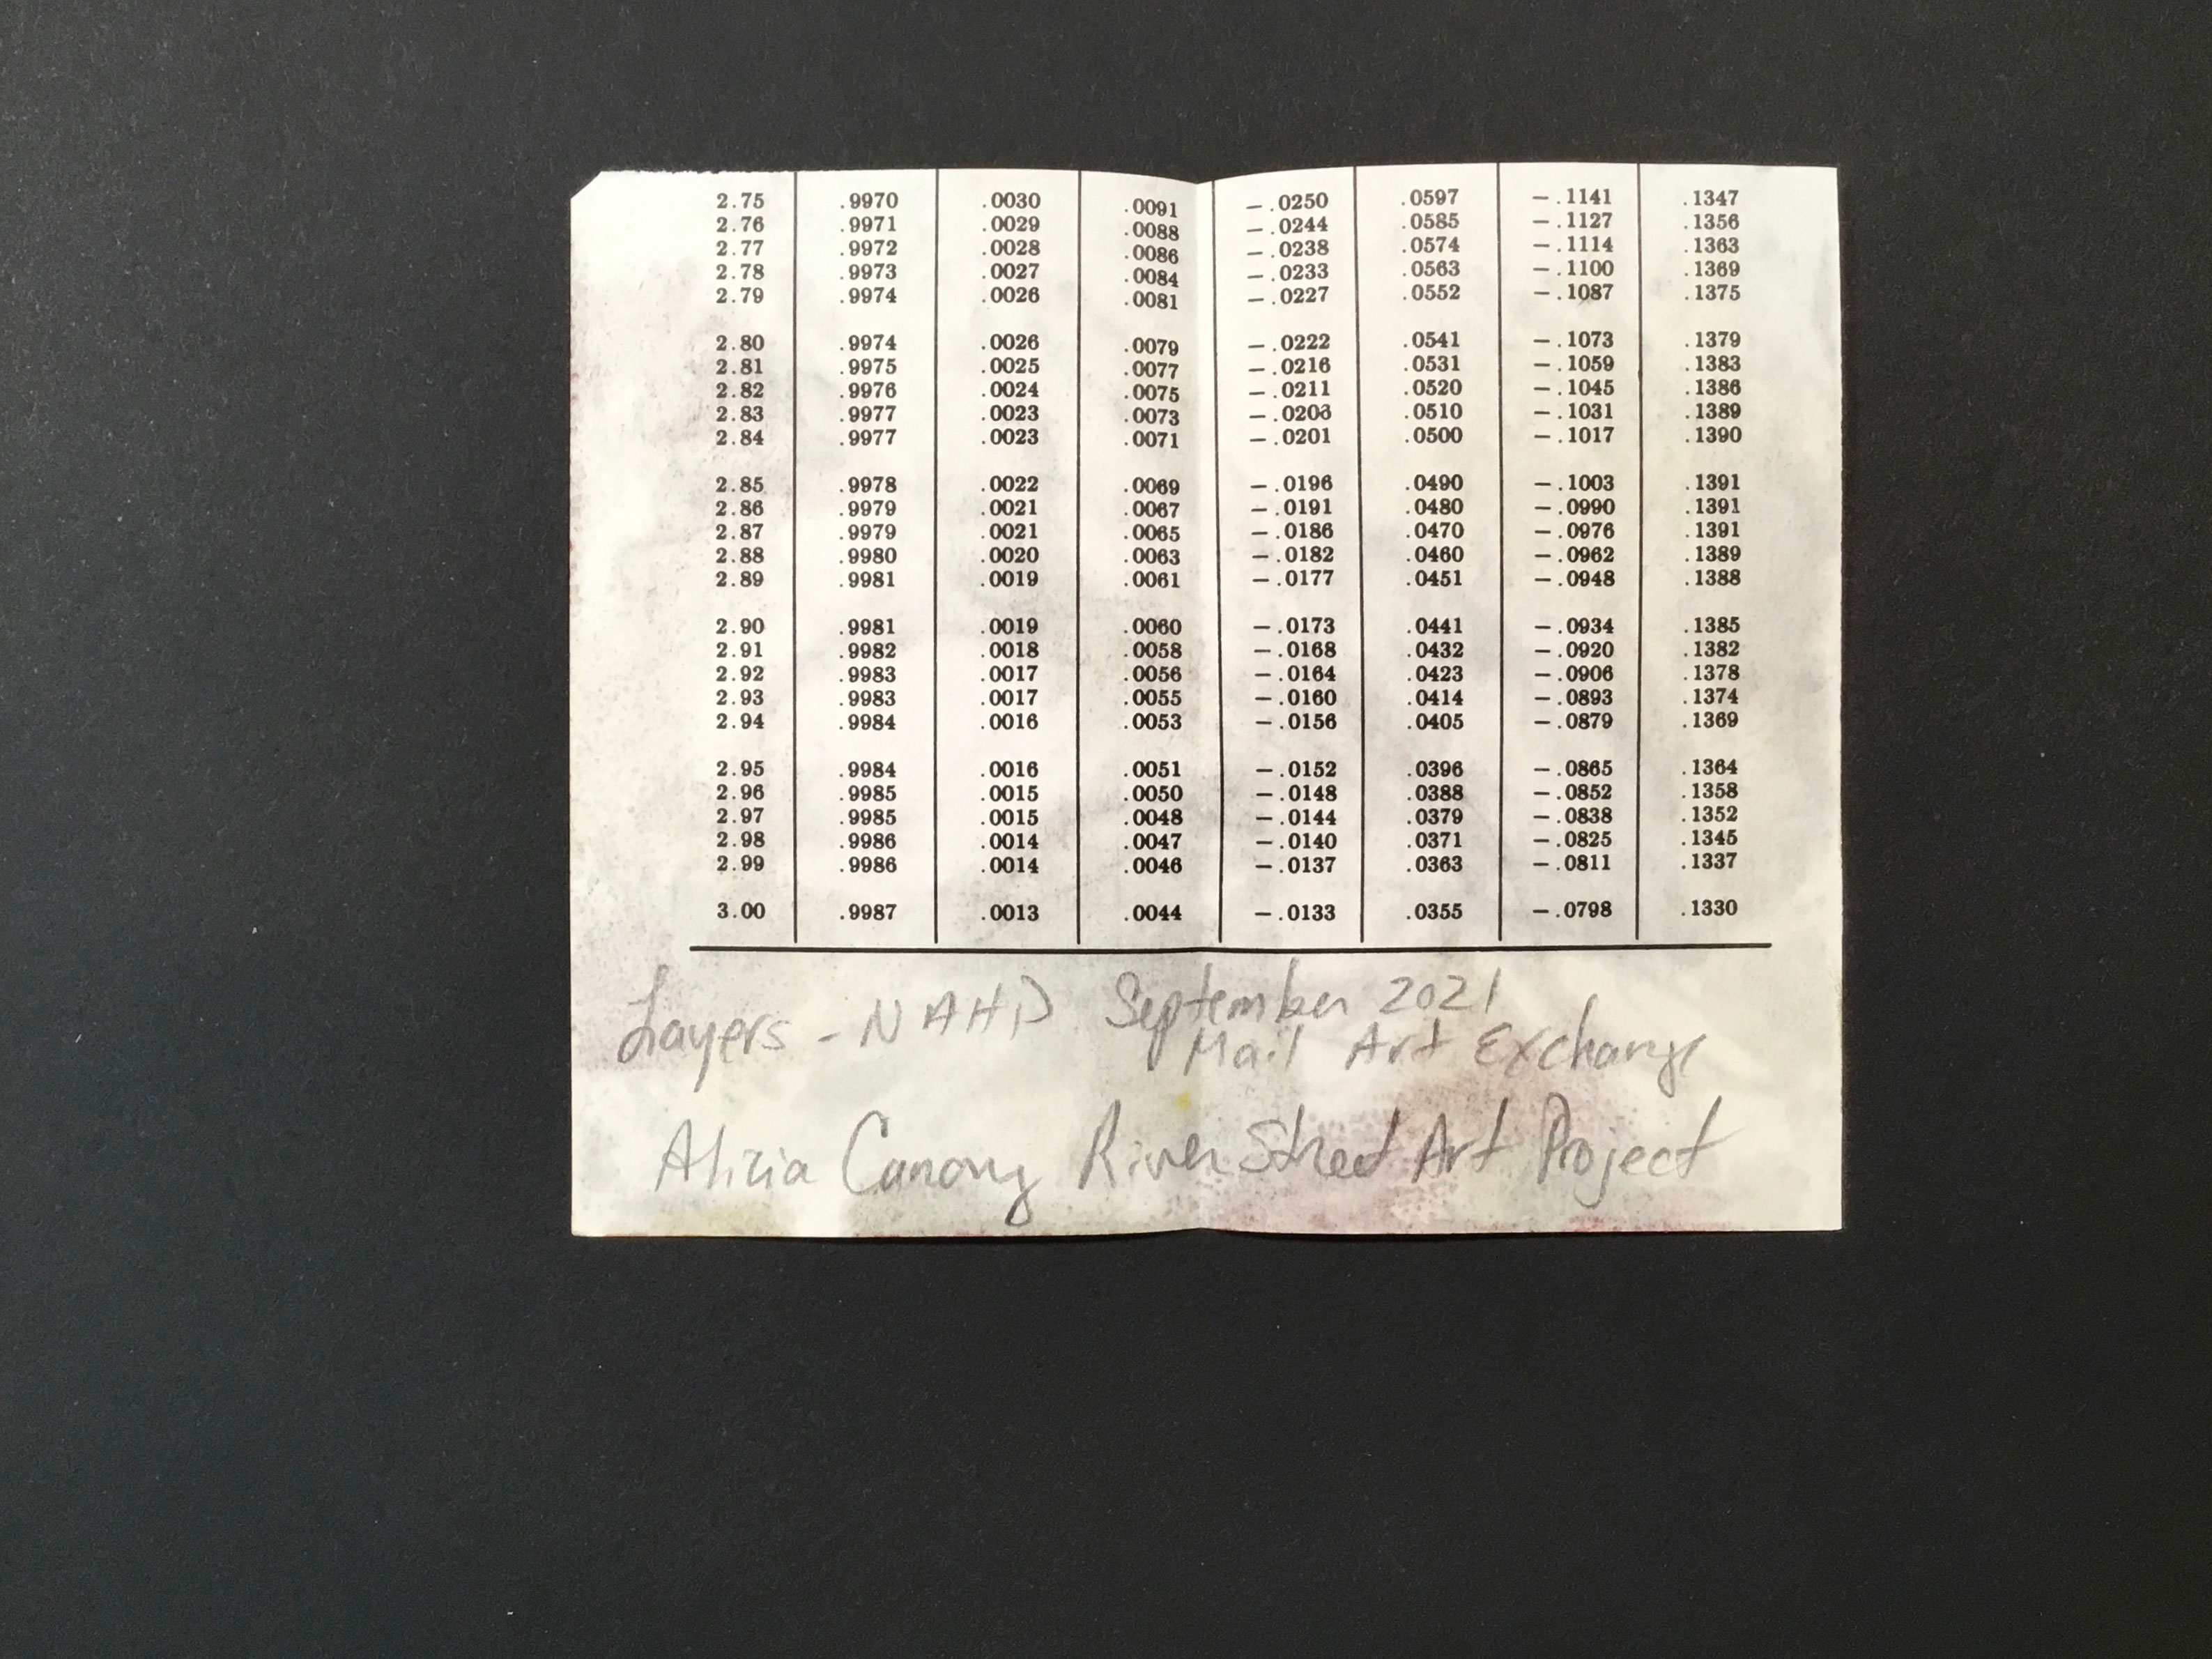 A cut-out page of mathematical tables with the artist's note and signature underneath.